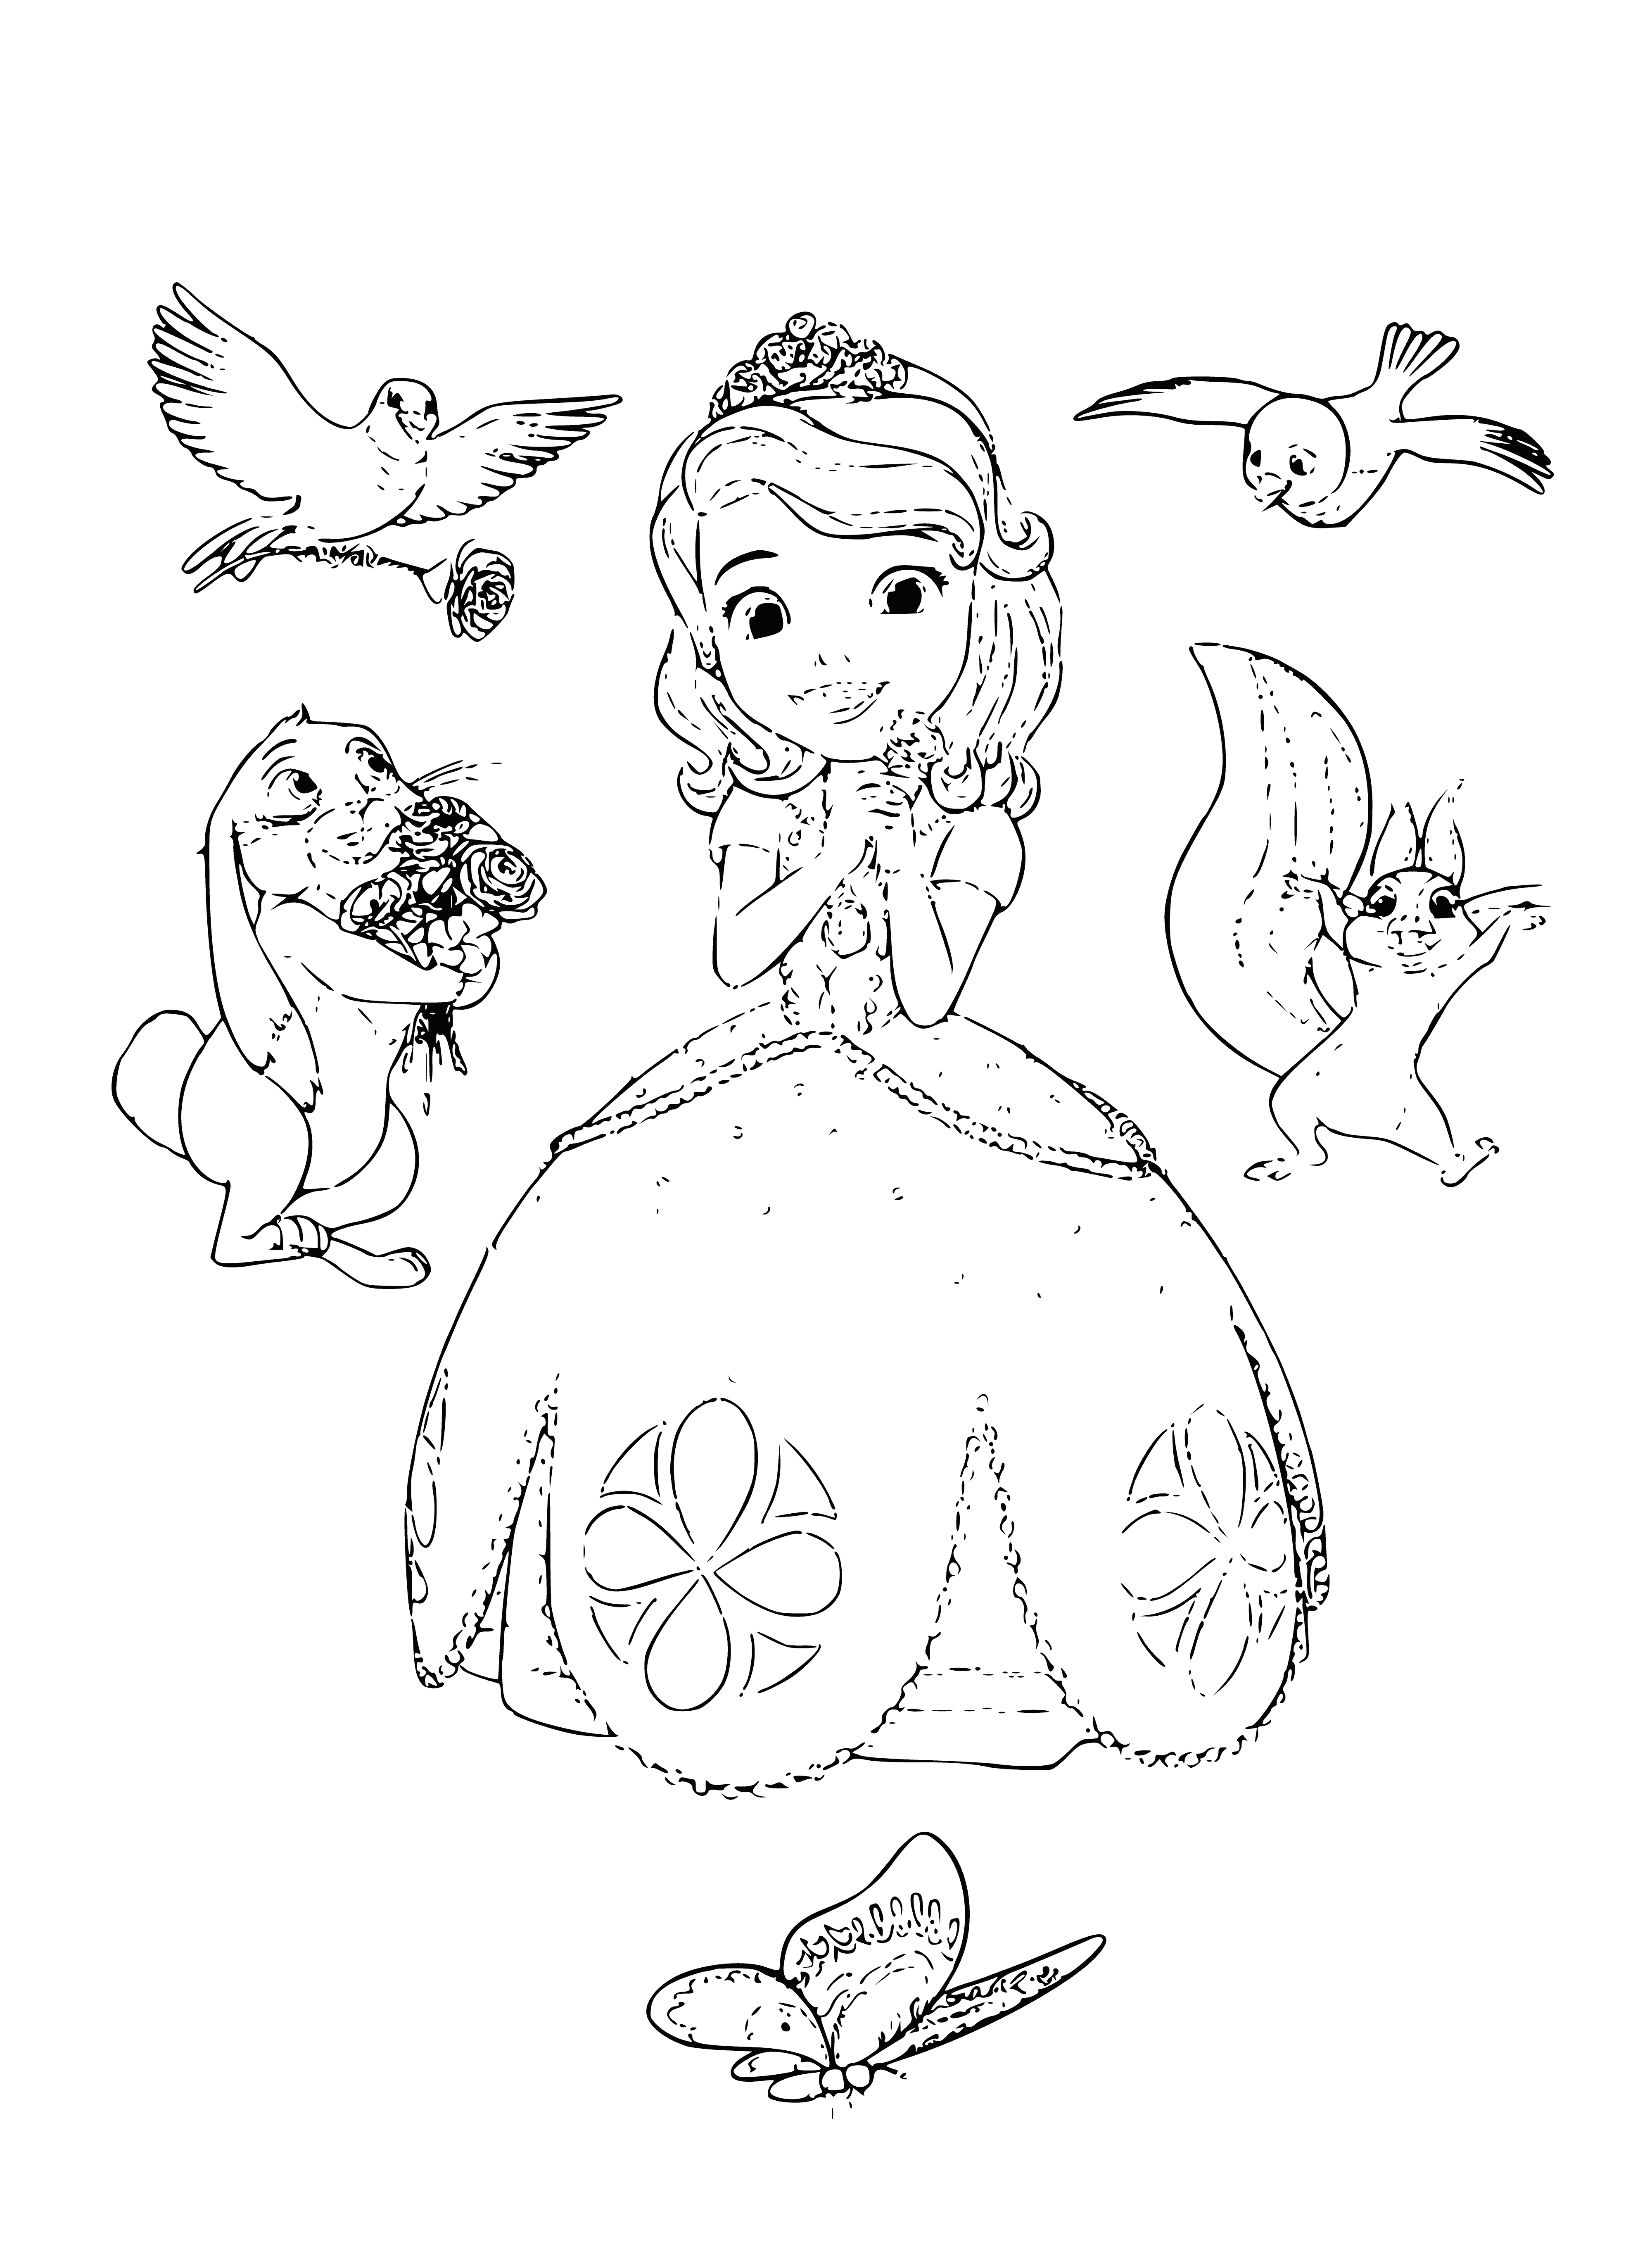 Sofia with animal friends coloring page